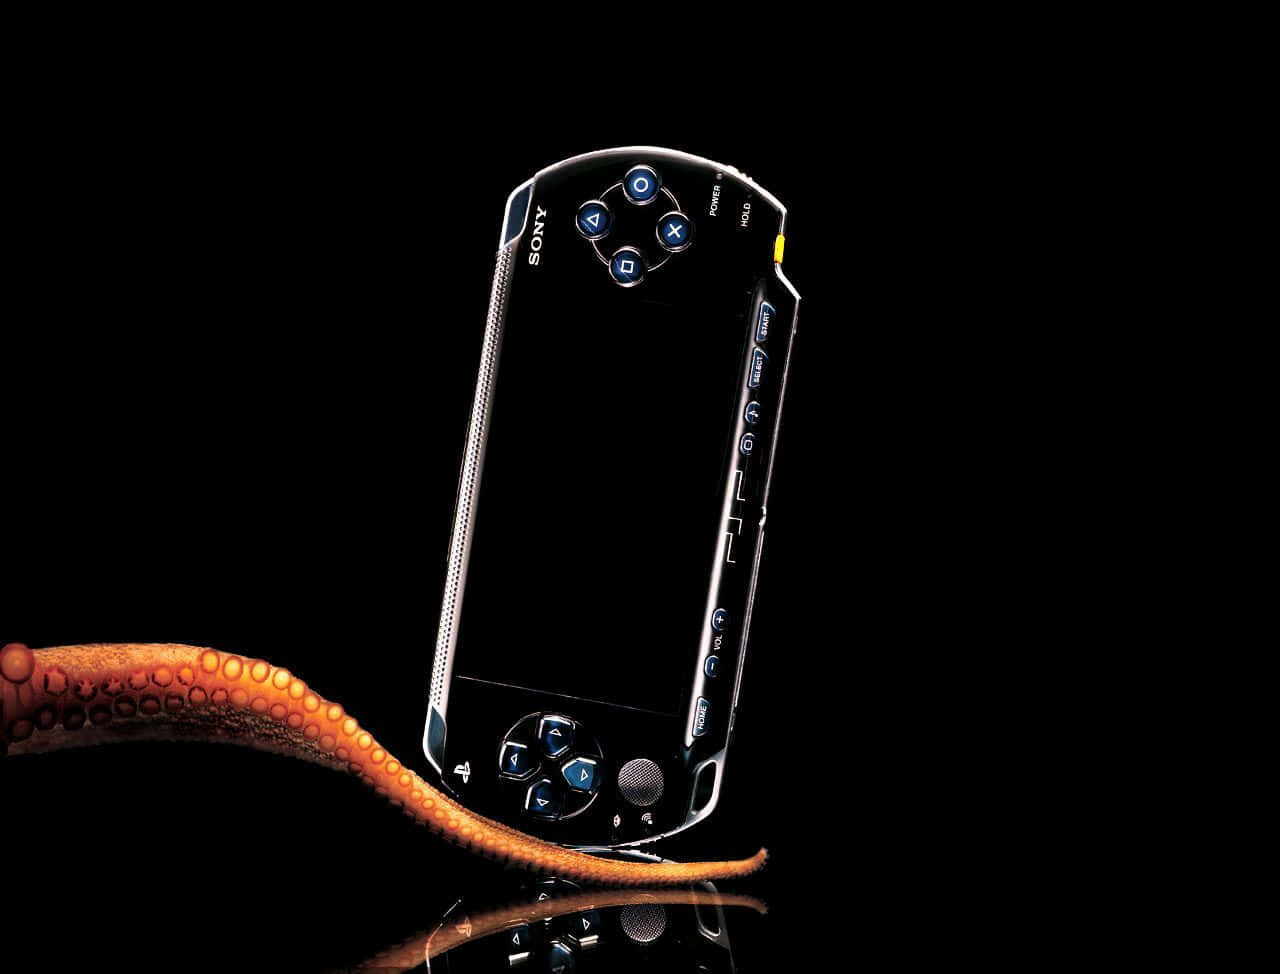 Vibrant PSP Wallpaper Featuring Game Characters